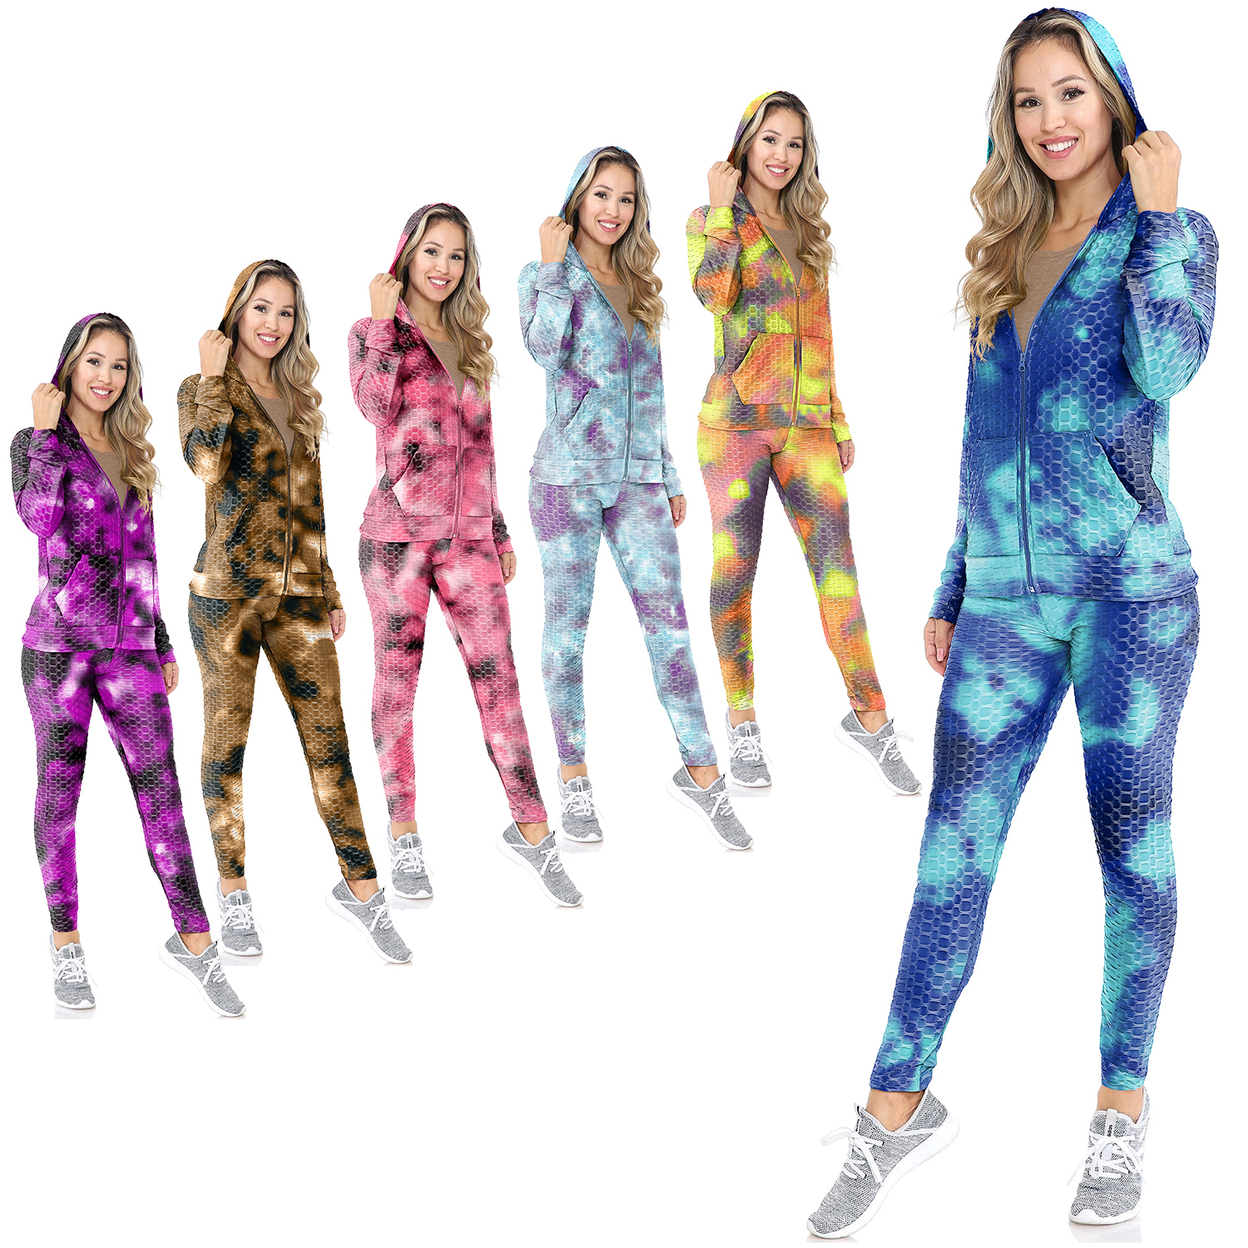 2-Set: Women's Athletic Anti-Cellulite Textured Tie Dye Body Contour Yoga Track Suit W/ Hood - Small, Solid